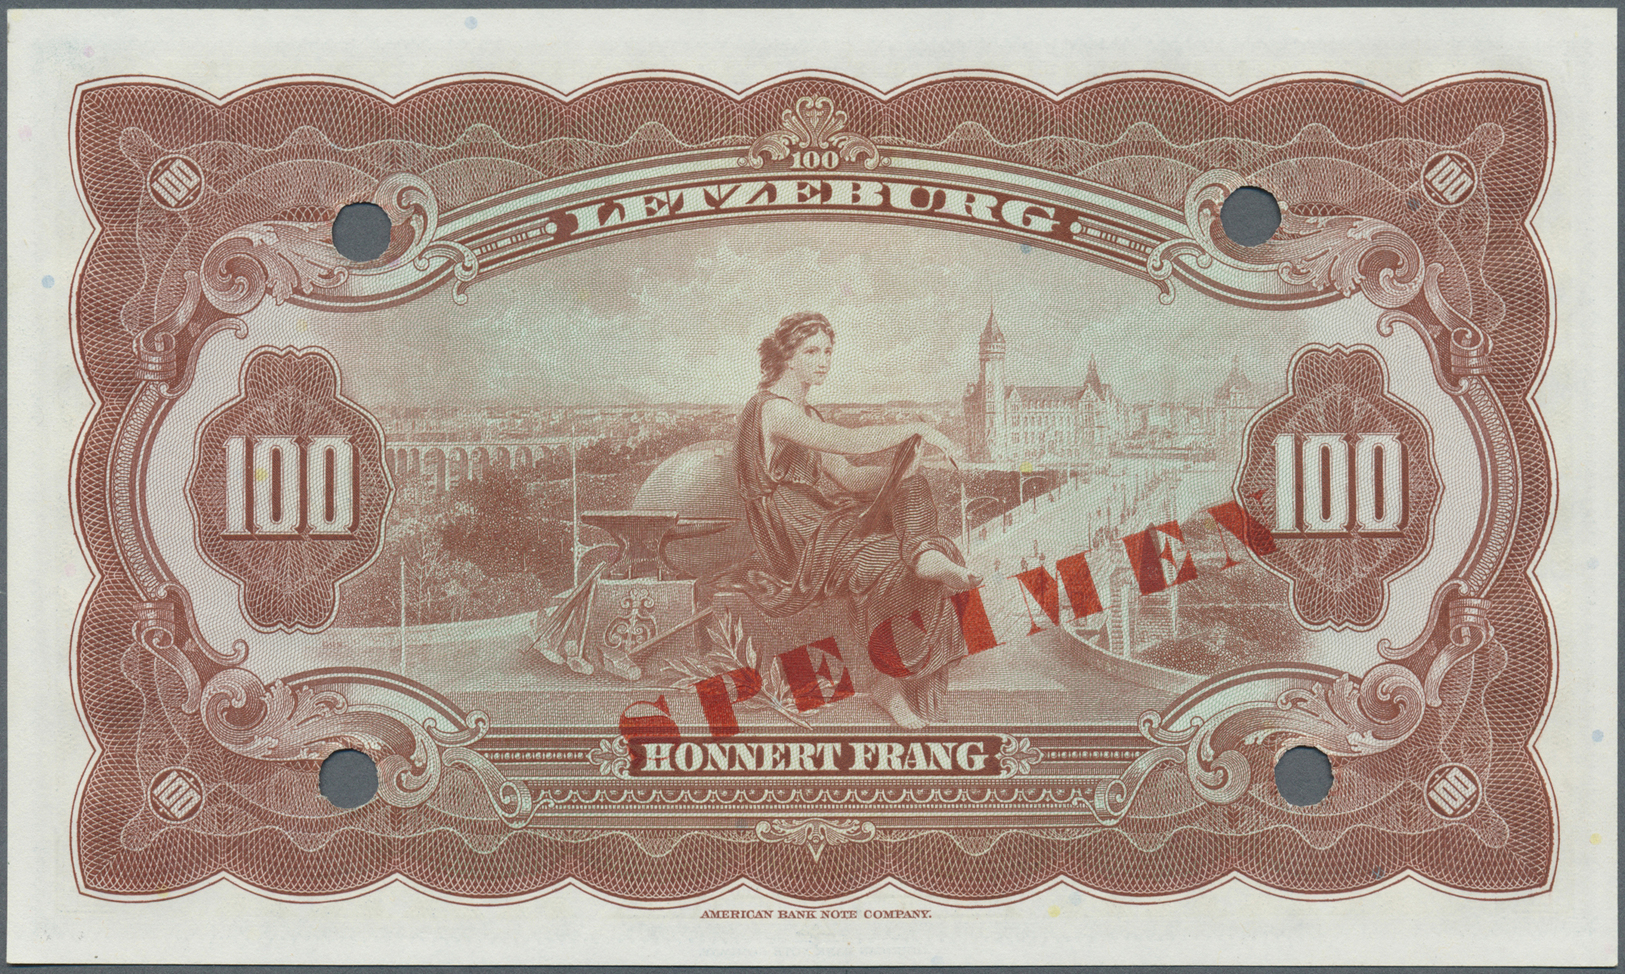 01592 Luxembourg: 100 Francs ND(1944) Specimen P. 47s. This Note Has A Red "Specimen" Overprint On Front And Back, 4 Ban - Luxembourg